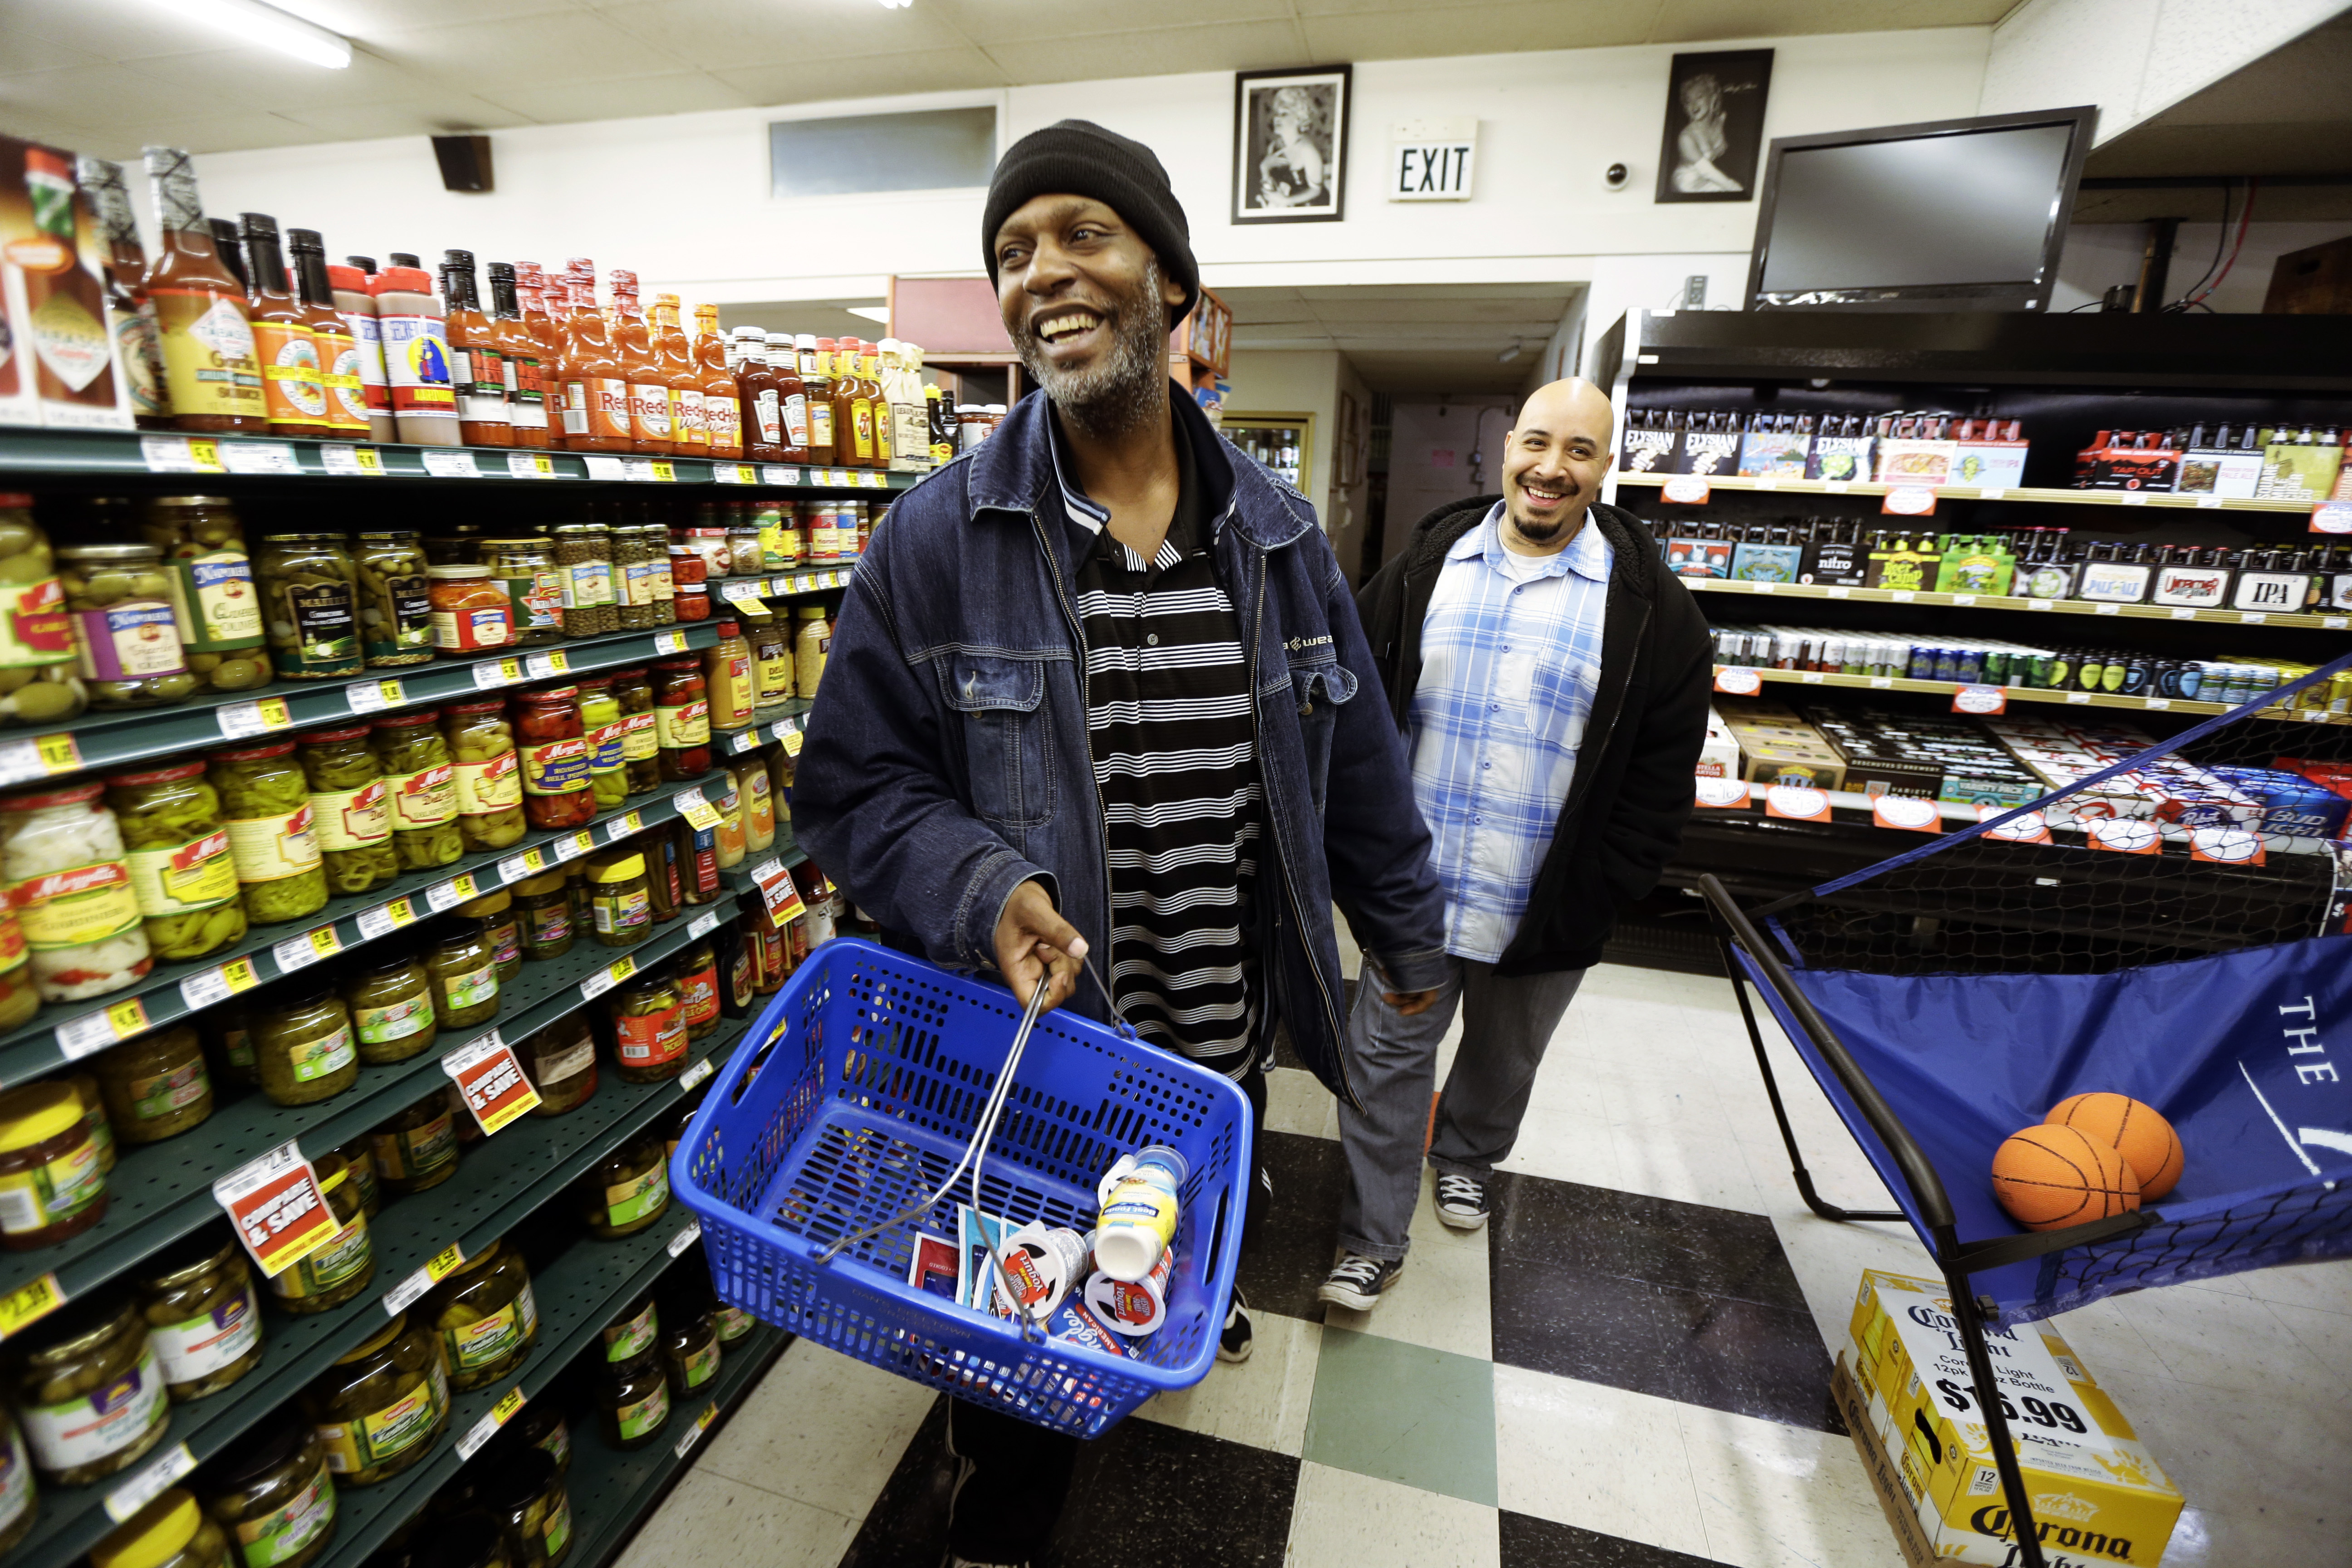 Frontline’s “Chasing Heroin” spotlights Seattle’s Law Enforcement Assisted Diversion (LEAD) program, which allows police officers in the city to redirect people stopped for low-level drug crimes to community-based services instead of jail. Here, Jerald Brooks, left, one of the programs original participants, goes shopping with his caseworker  